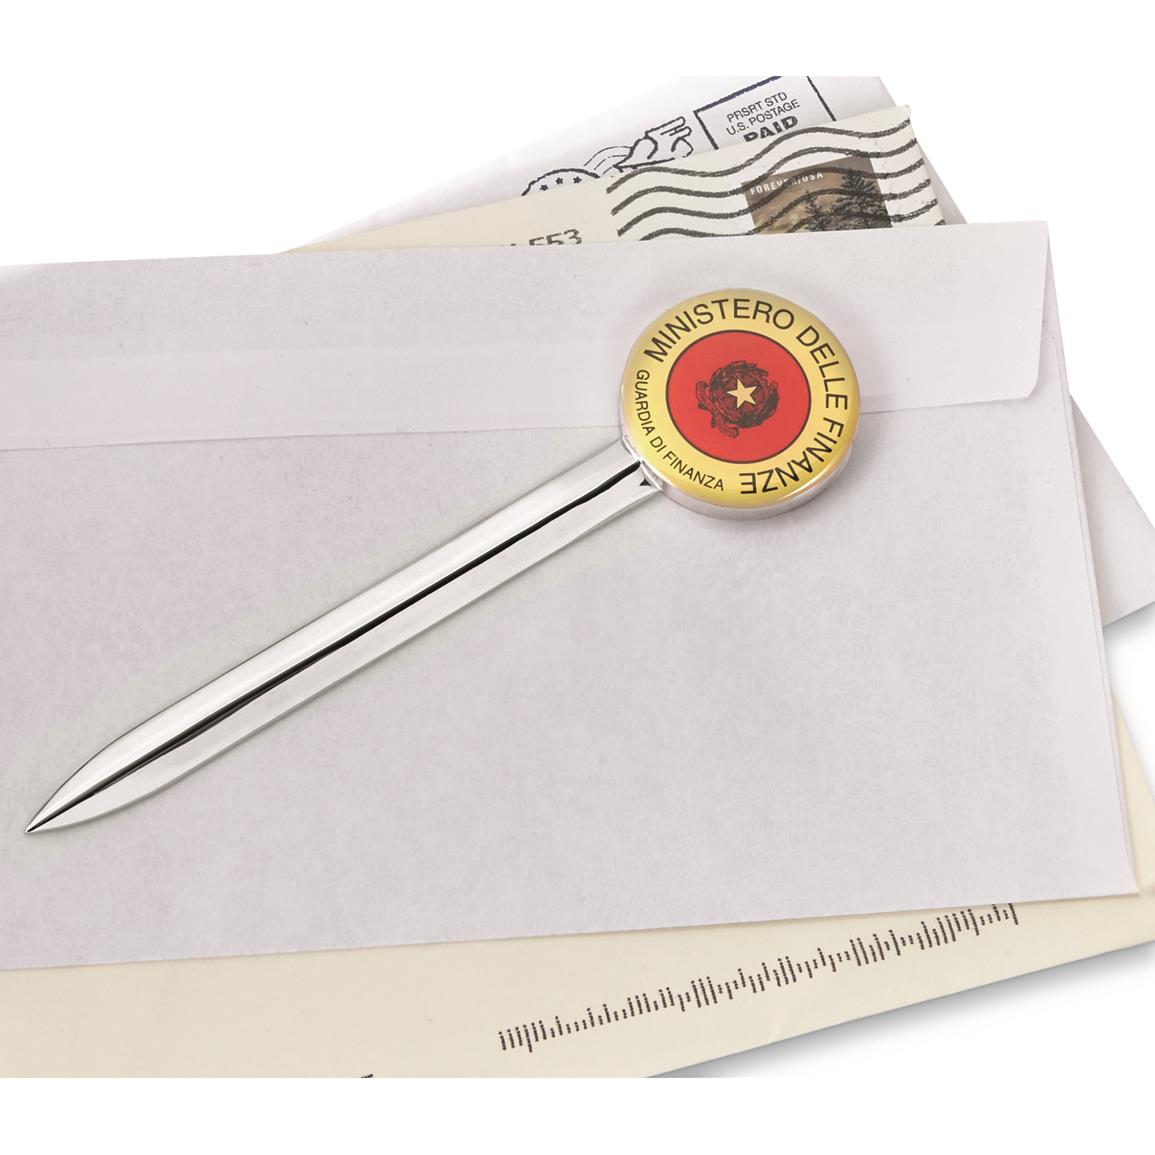 Italian Ministry of Interior Surplus Letter Openers, 2 Pack, New